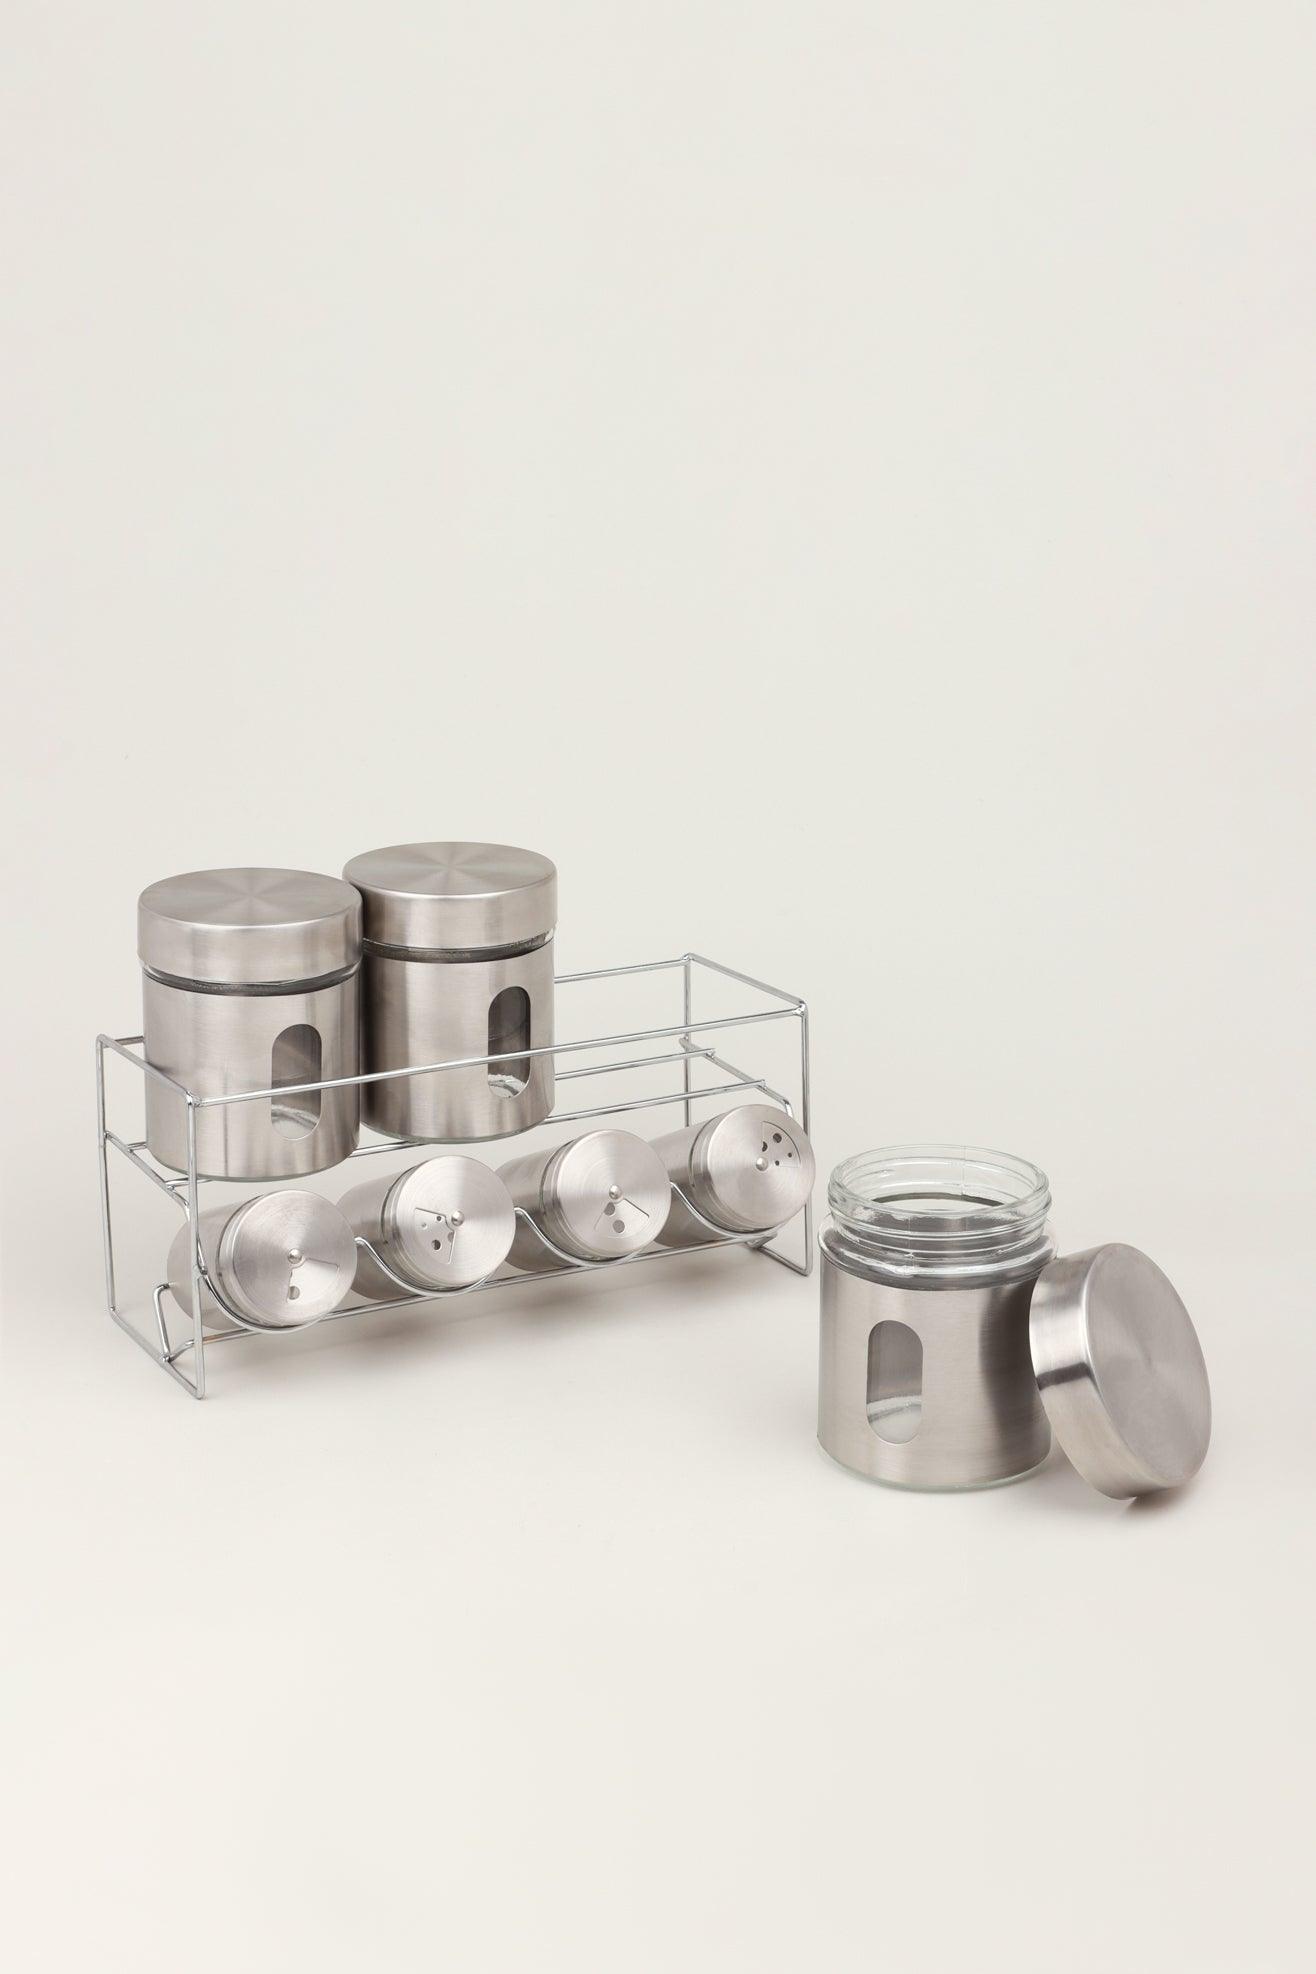 G Decor spices rack Silver Clear Glass Chrome Silver Free Standing Spice Rack Kitchen Organiser Jars Set